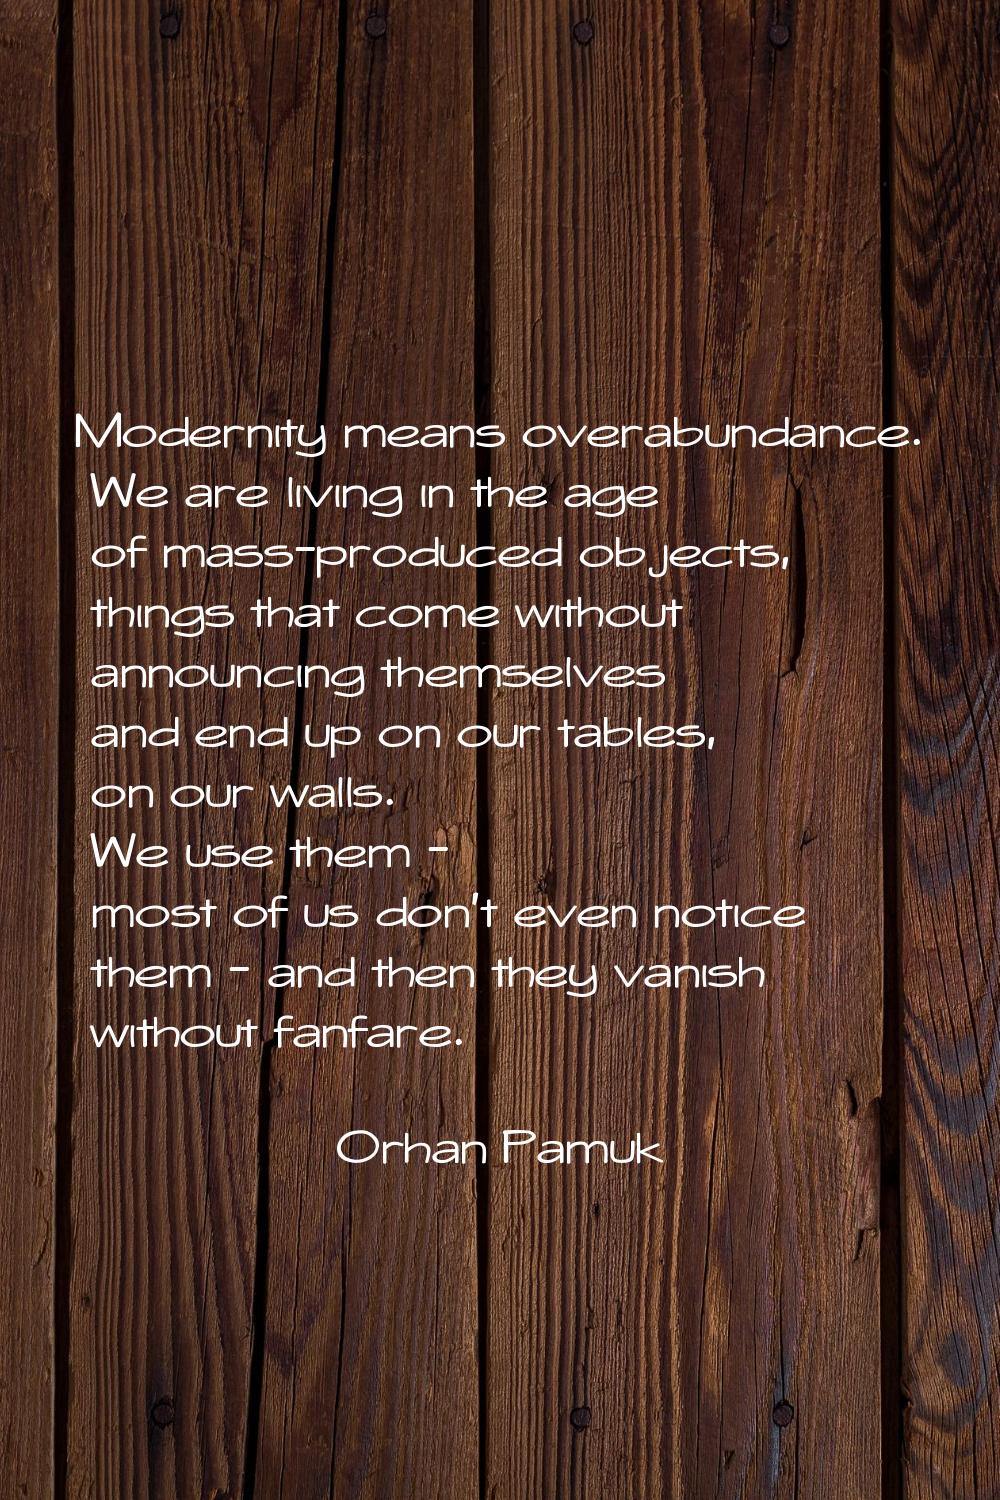 Modernity means overabundance. We are living in the age of mass-produced objects, things that come 